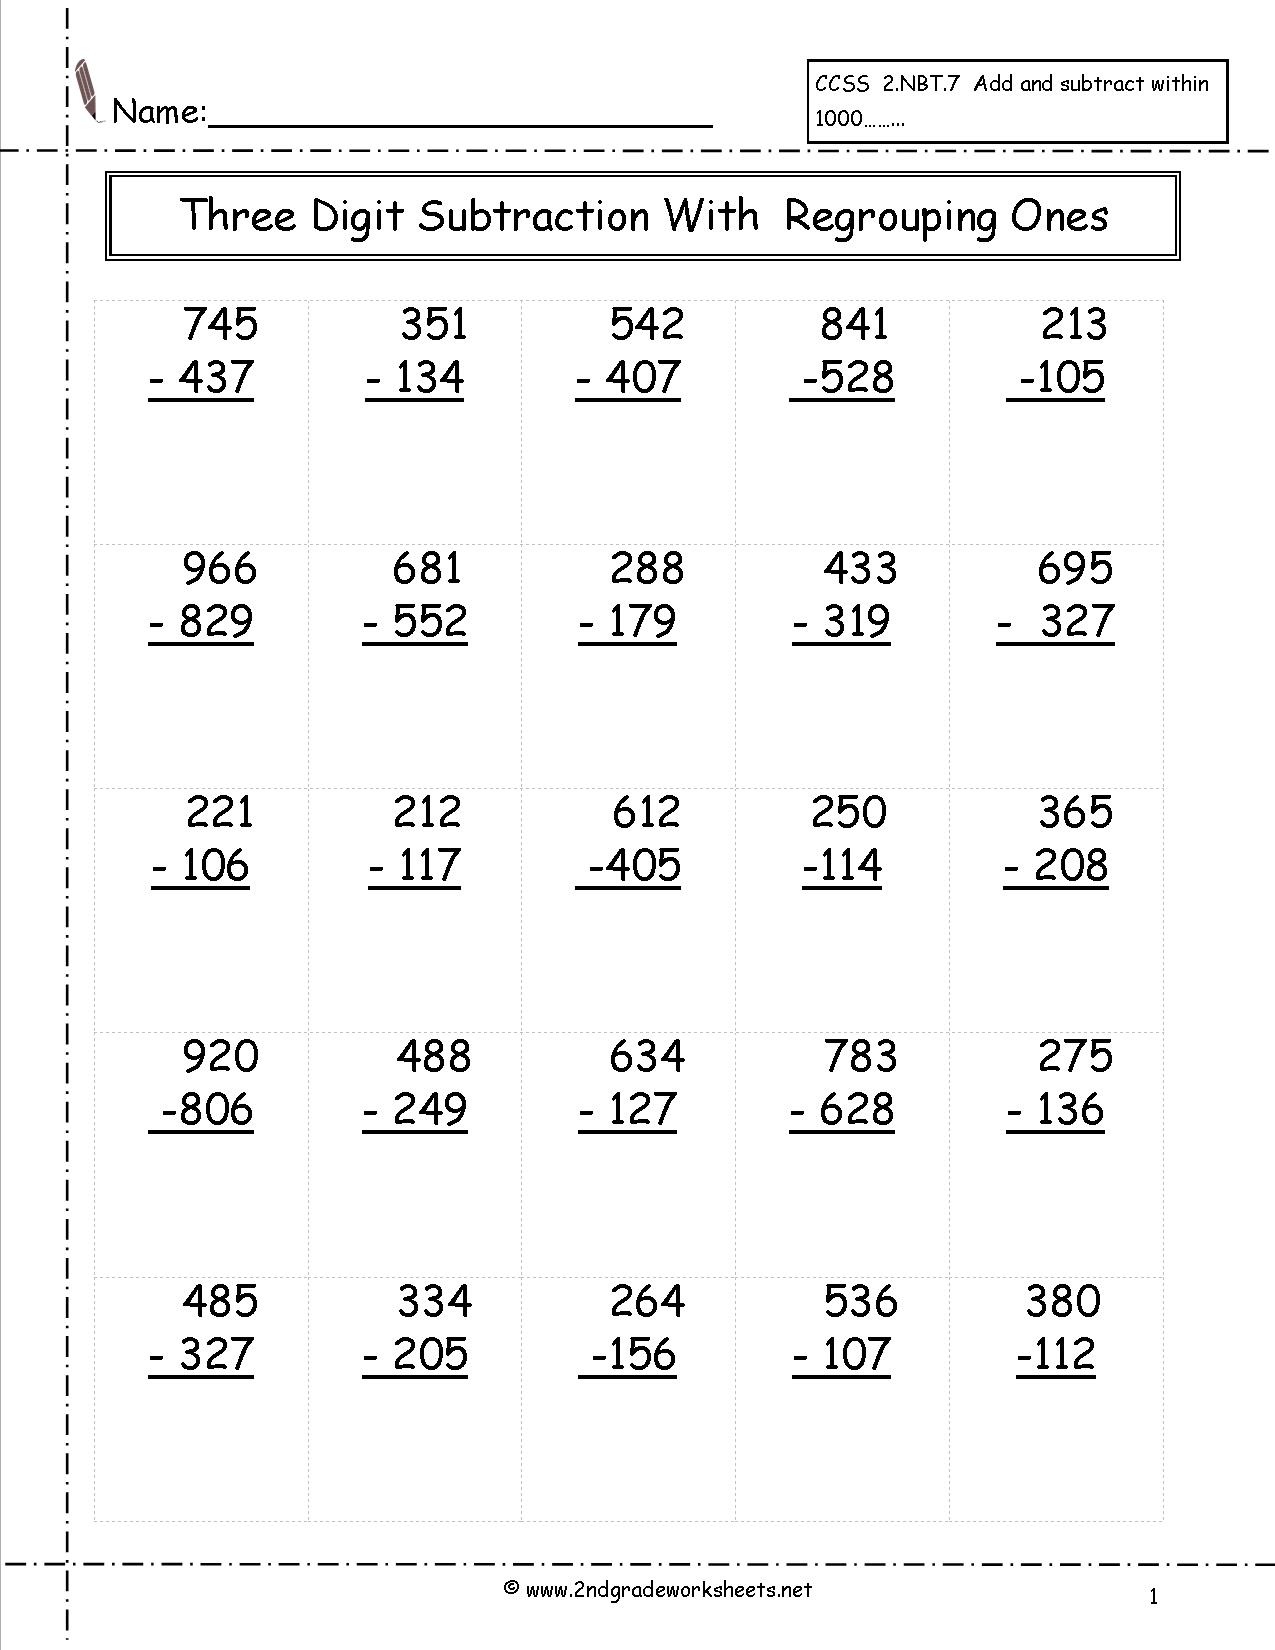 Three-Digit Subtraction Worksheets Image